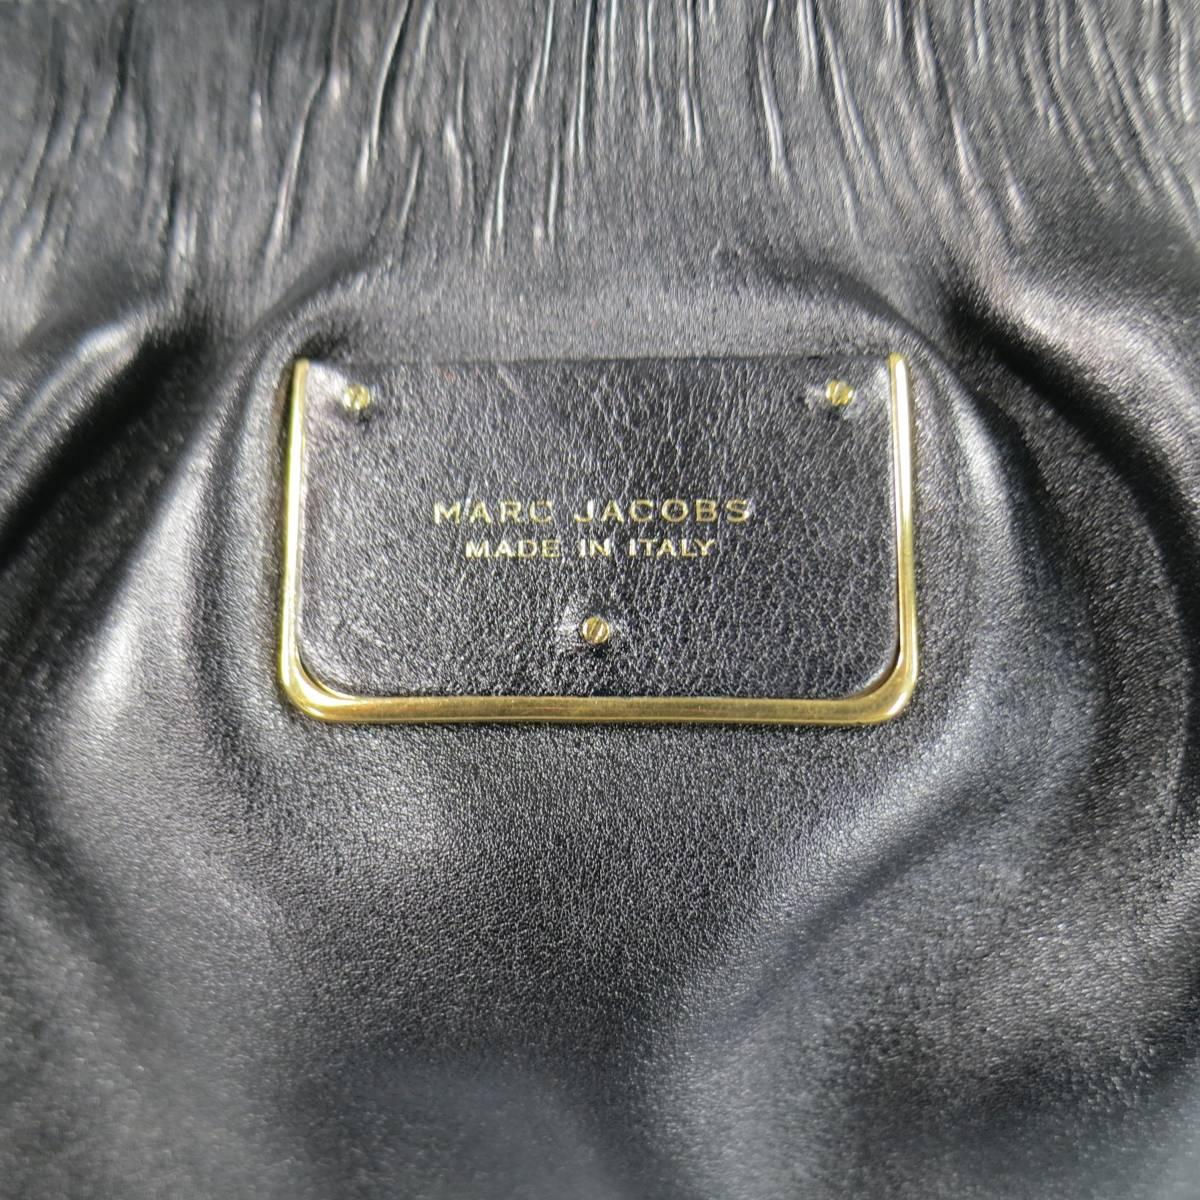 Lovely MARC JACOBS shoulder bag in black gathered leather featuring a gold tone double zip closure, pleated top, textured base, front plaque, and double woven chain top handles. Hardware protector stickers still attached. Made in Italy.
 
New